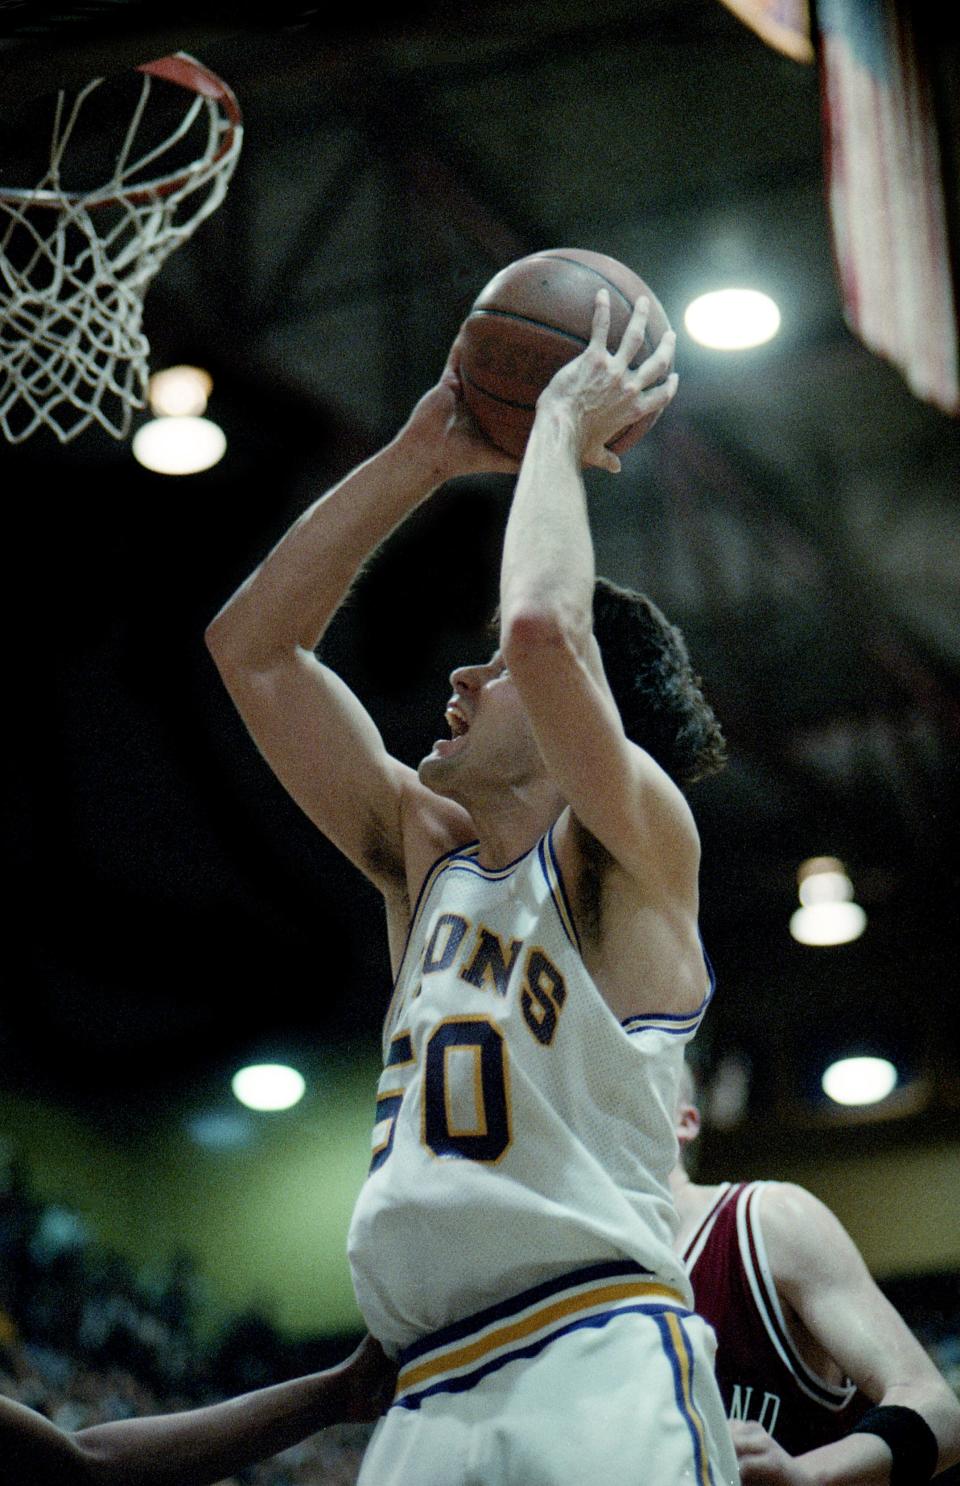 David Lipscomb standout John Pierce (50) goes up for the basket that tied him with Phillip Hutcheson, a former Lipscomb standout, as college basketball’s all-time leading scorer for a career at 4,106 in the Bisons’ 119-102 victory over Cumberland in a packed McQuiddy Gym on Feb. 24, 1994. Pierce finished with 4,110 to take over the top spot.